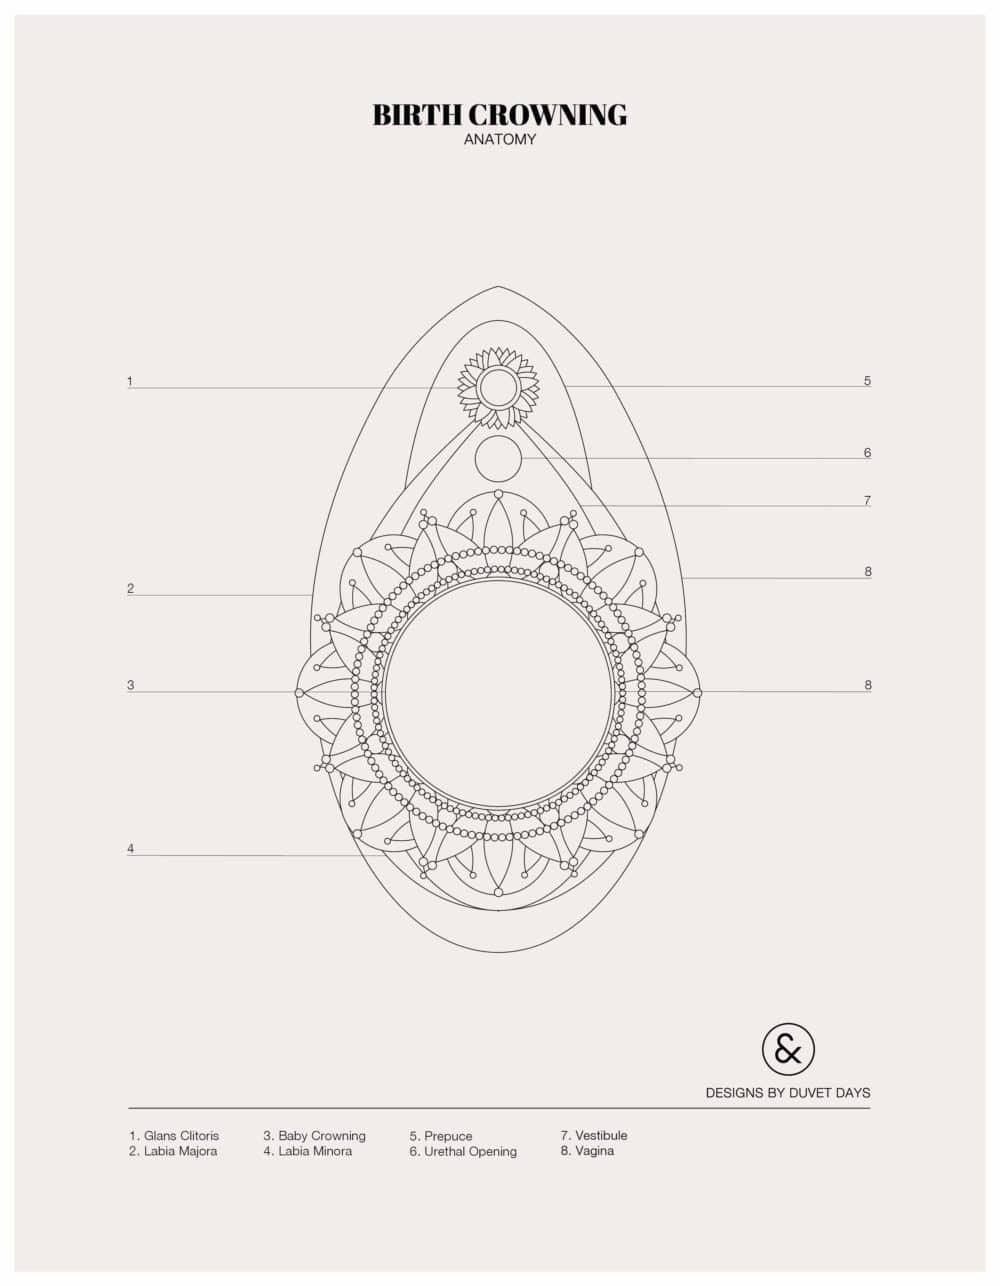 Designs By Duvet Days_8.5x11_Birth Crowning_Colouring Sheet_Preview